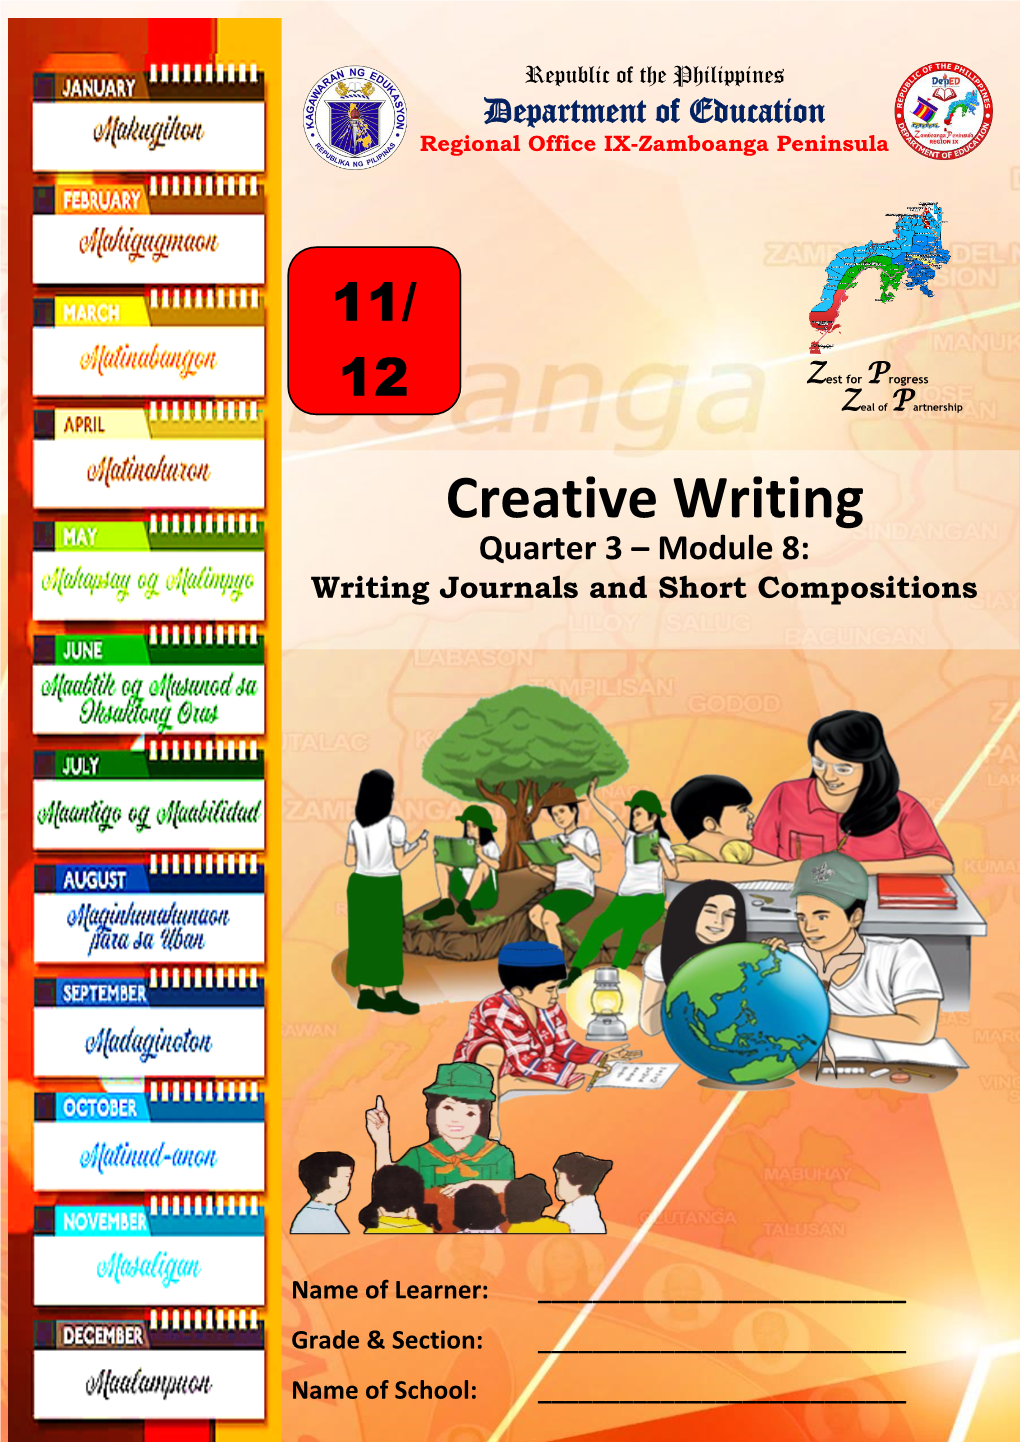 Creative Writing Quarter 3 – Module 8: Writing Journals and Short Compositions